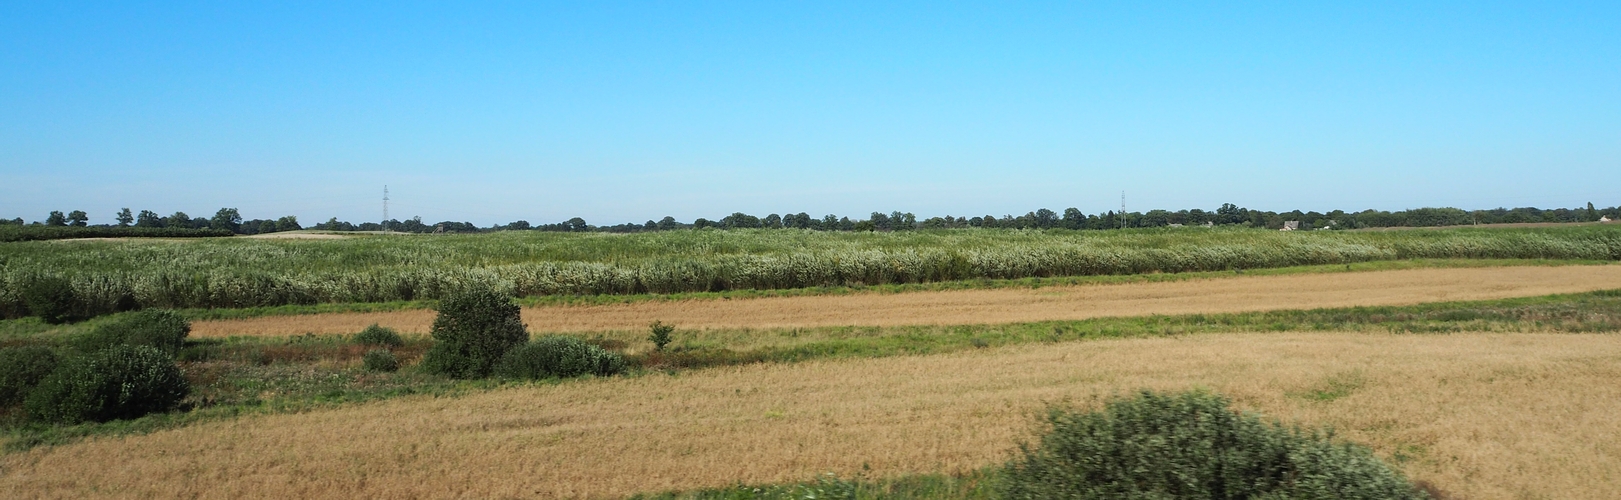 Fields, harvested in 
the foreground, flat, with trees in the background.